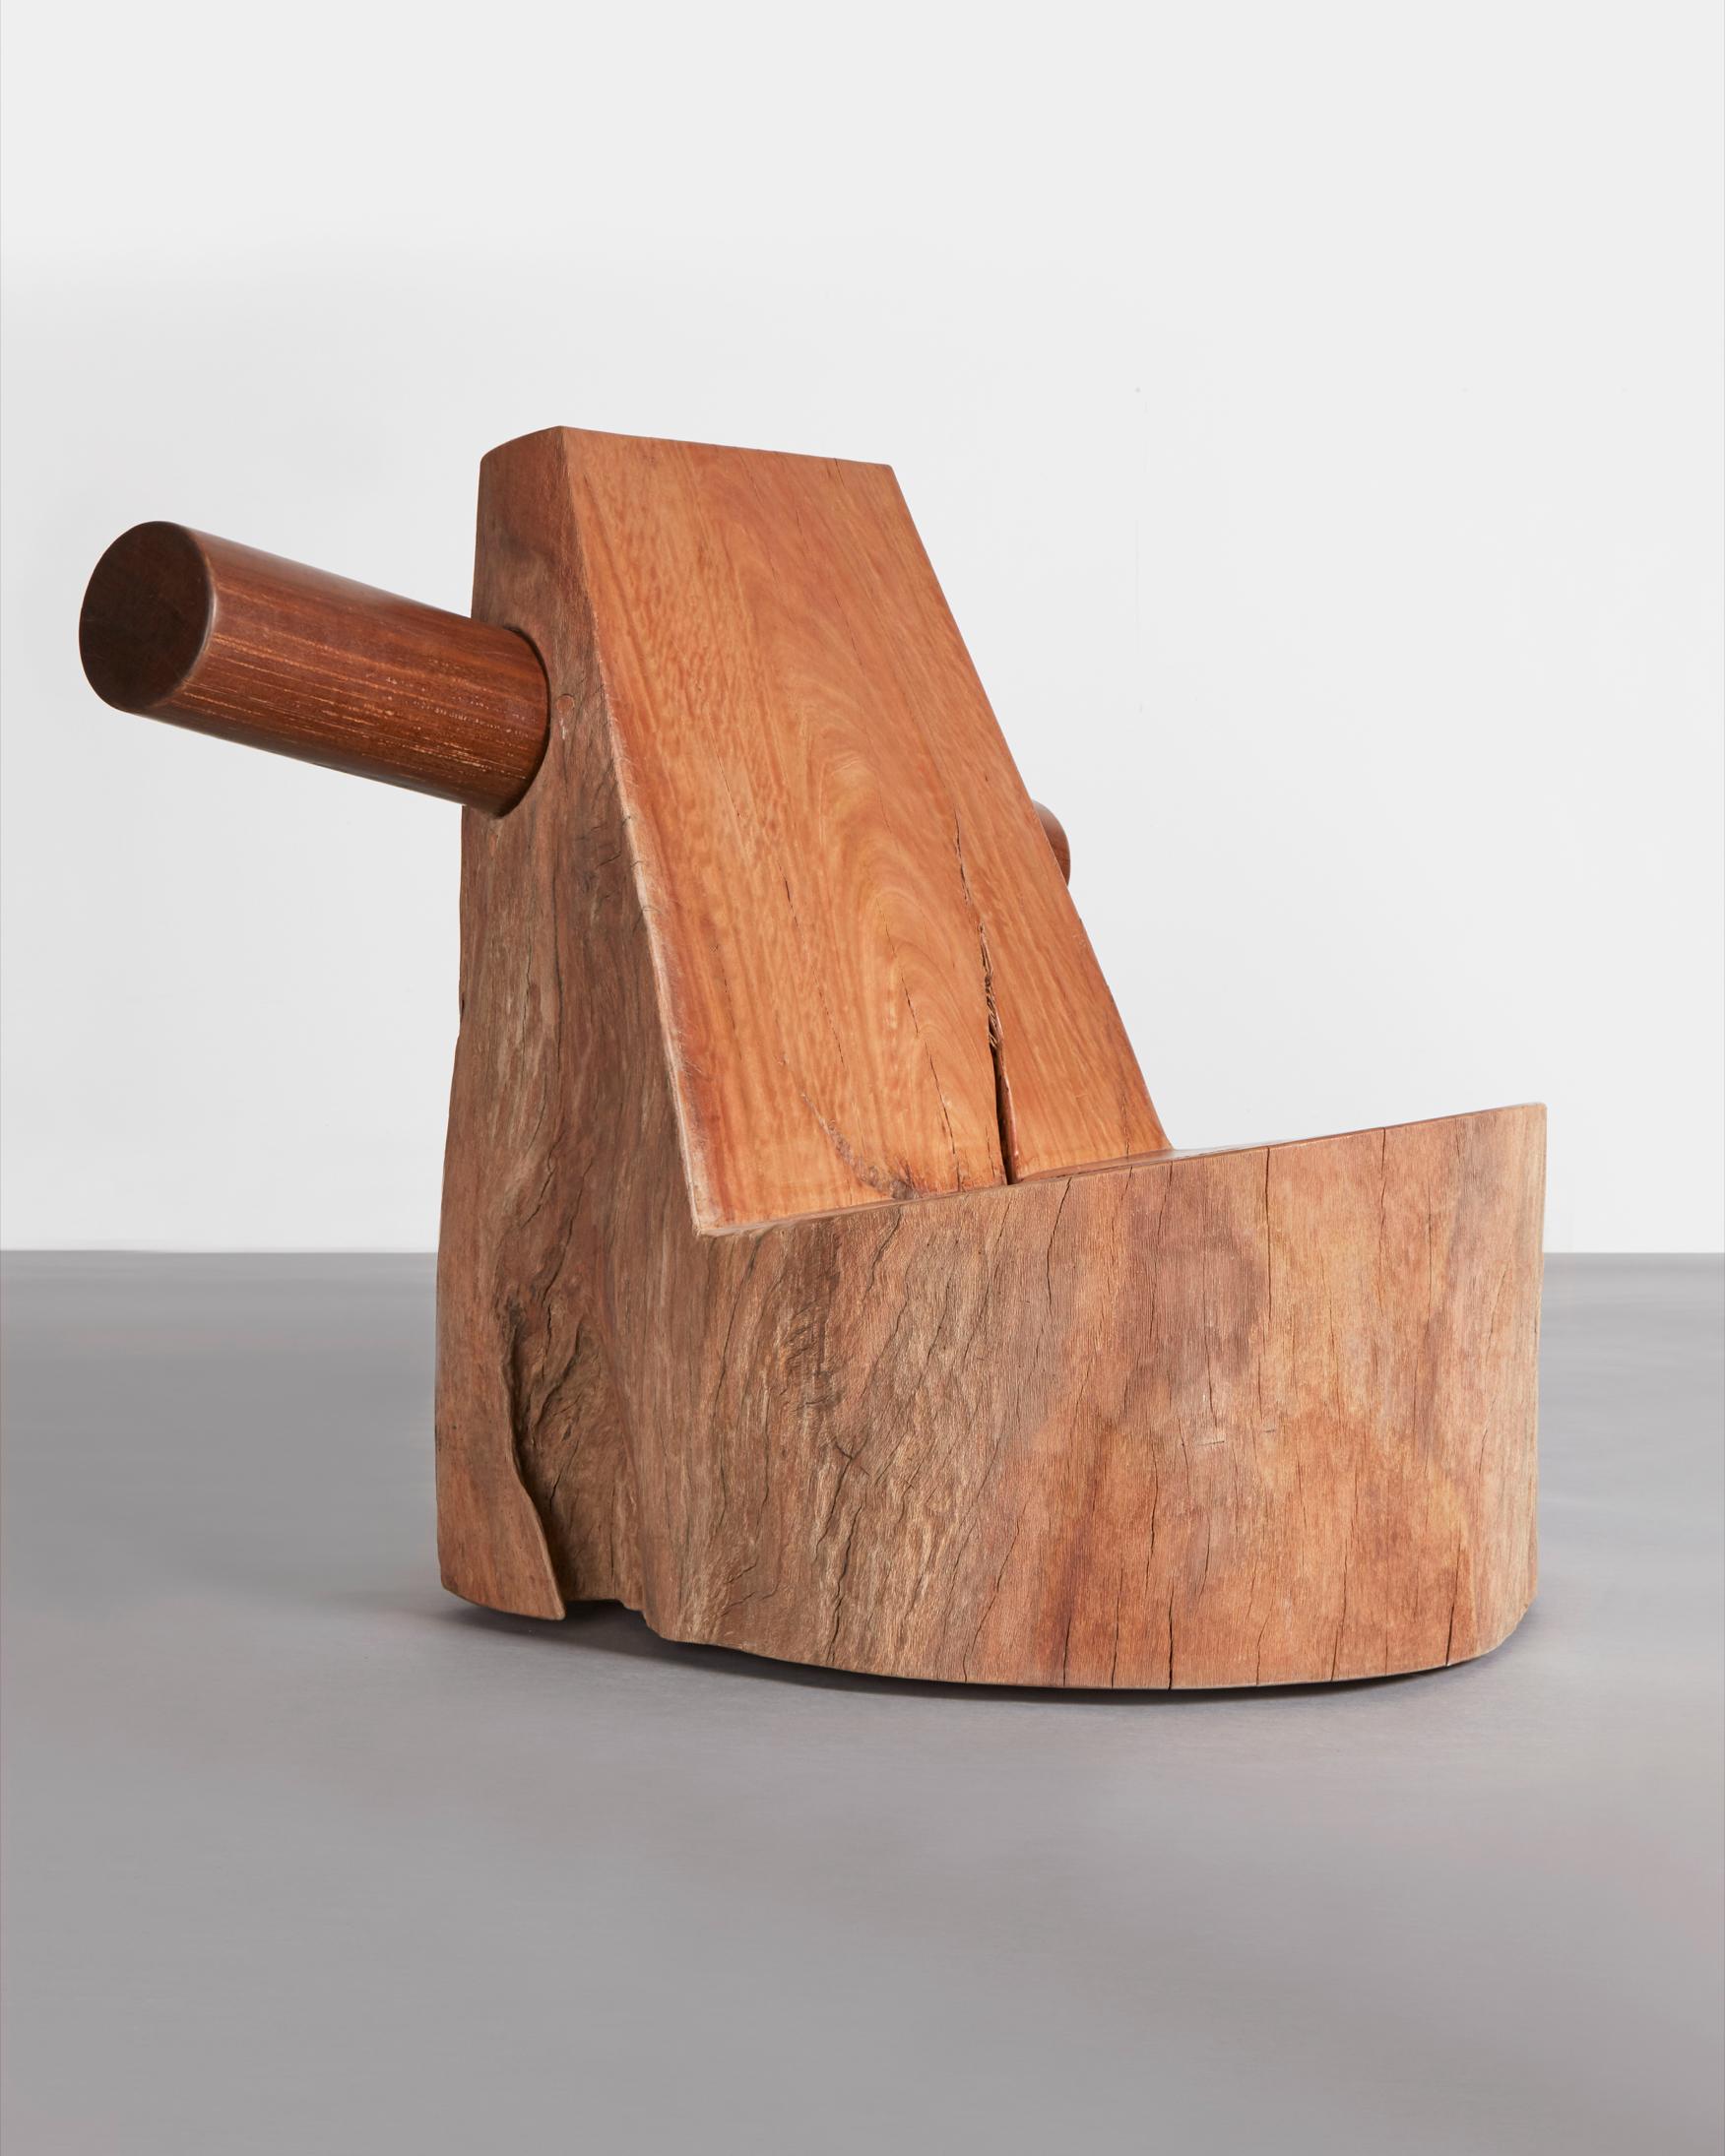 Unique lounge chair in hand carved river red Gum wood (Eucalyptus camaldulensis) and repurposed Ipê wood (Tabebuia spp.). Designed and made by Zanini de Zanine Caldas, Brazil, 2019.